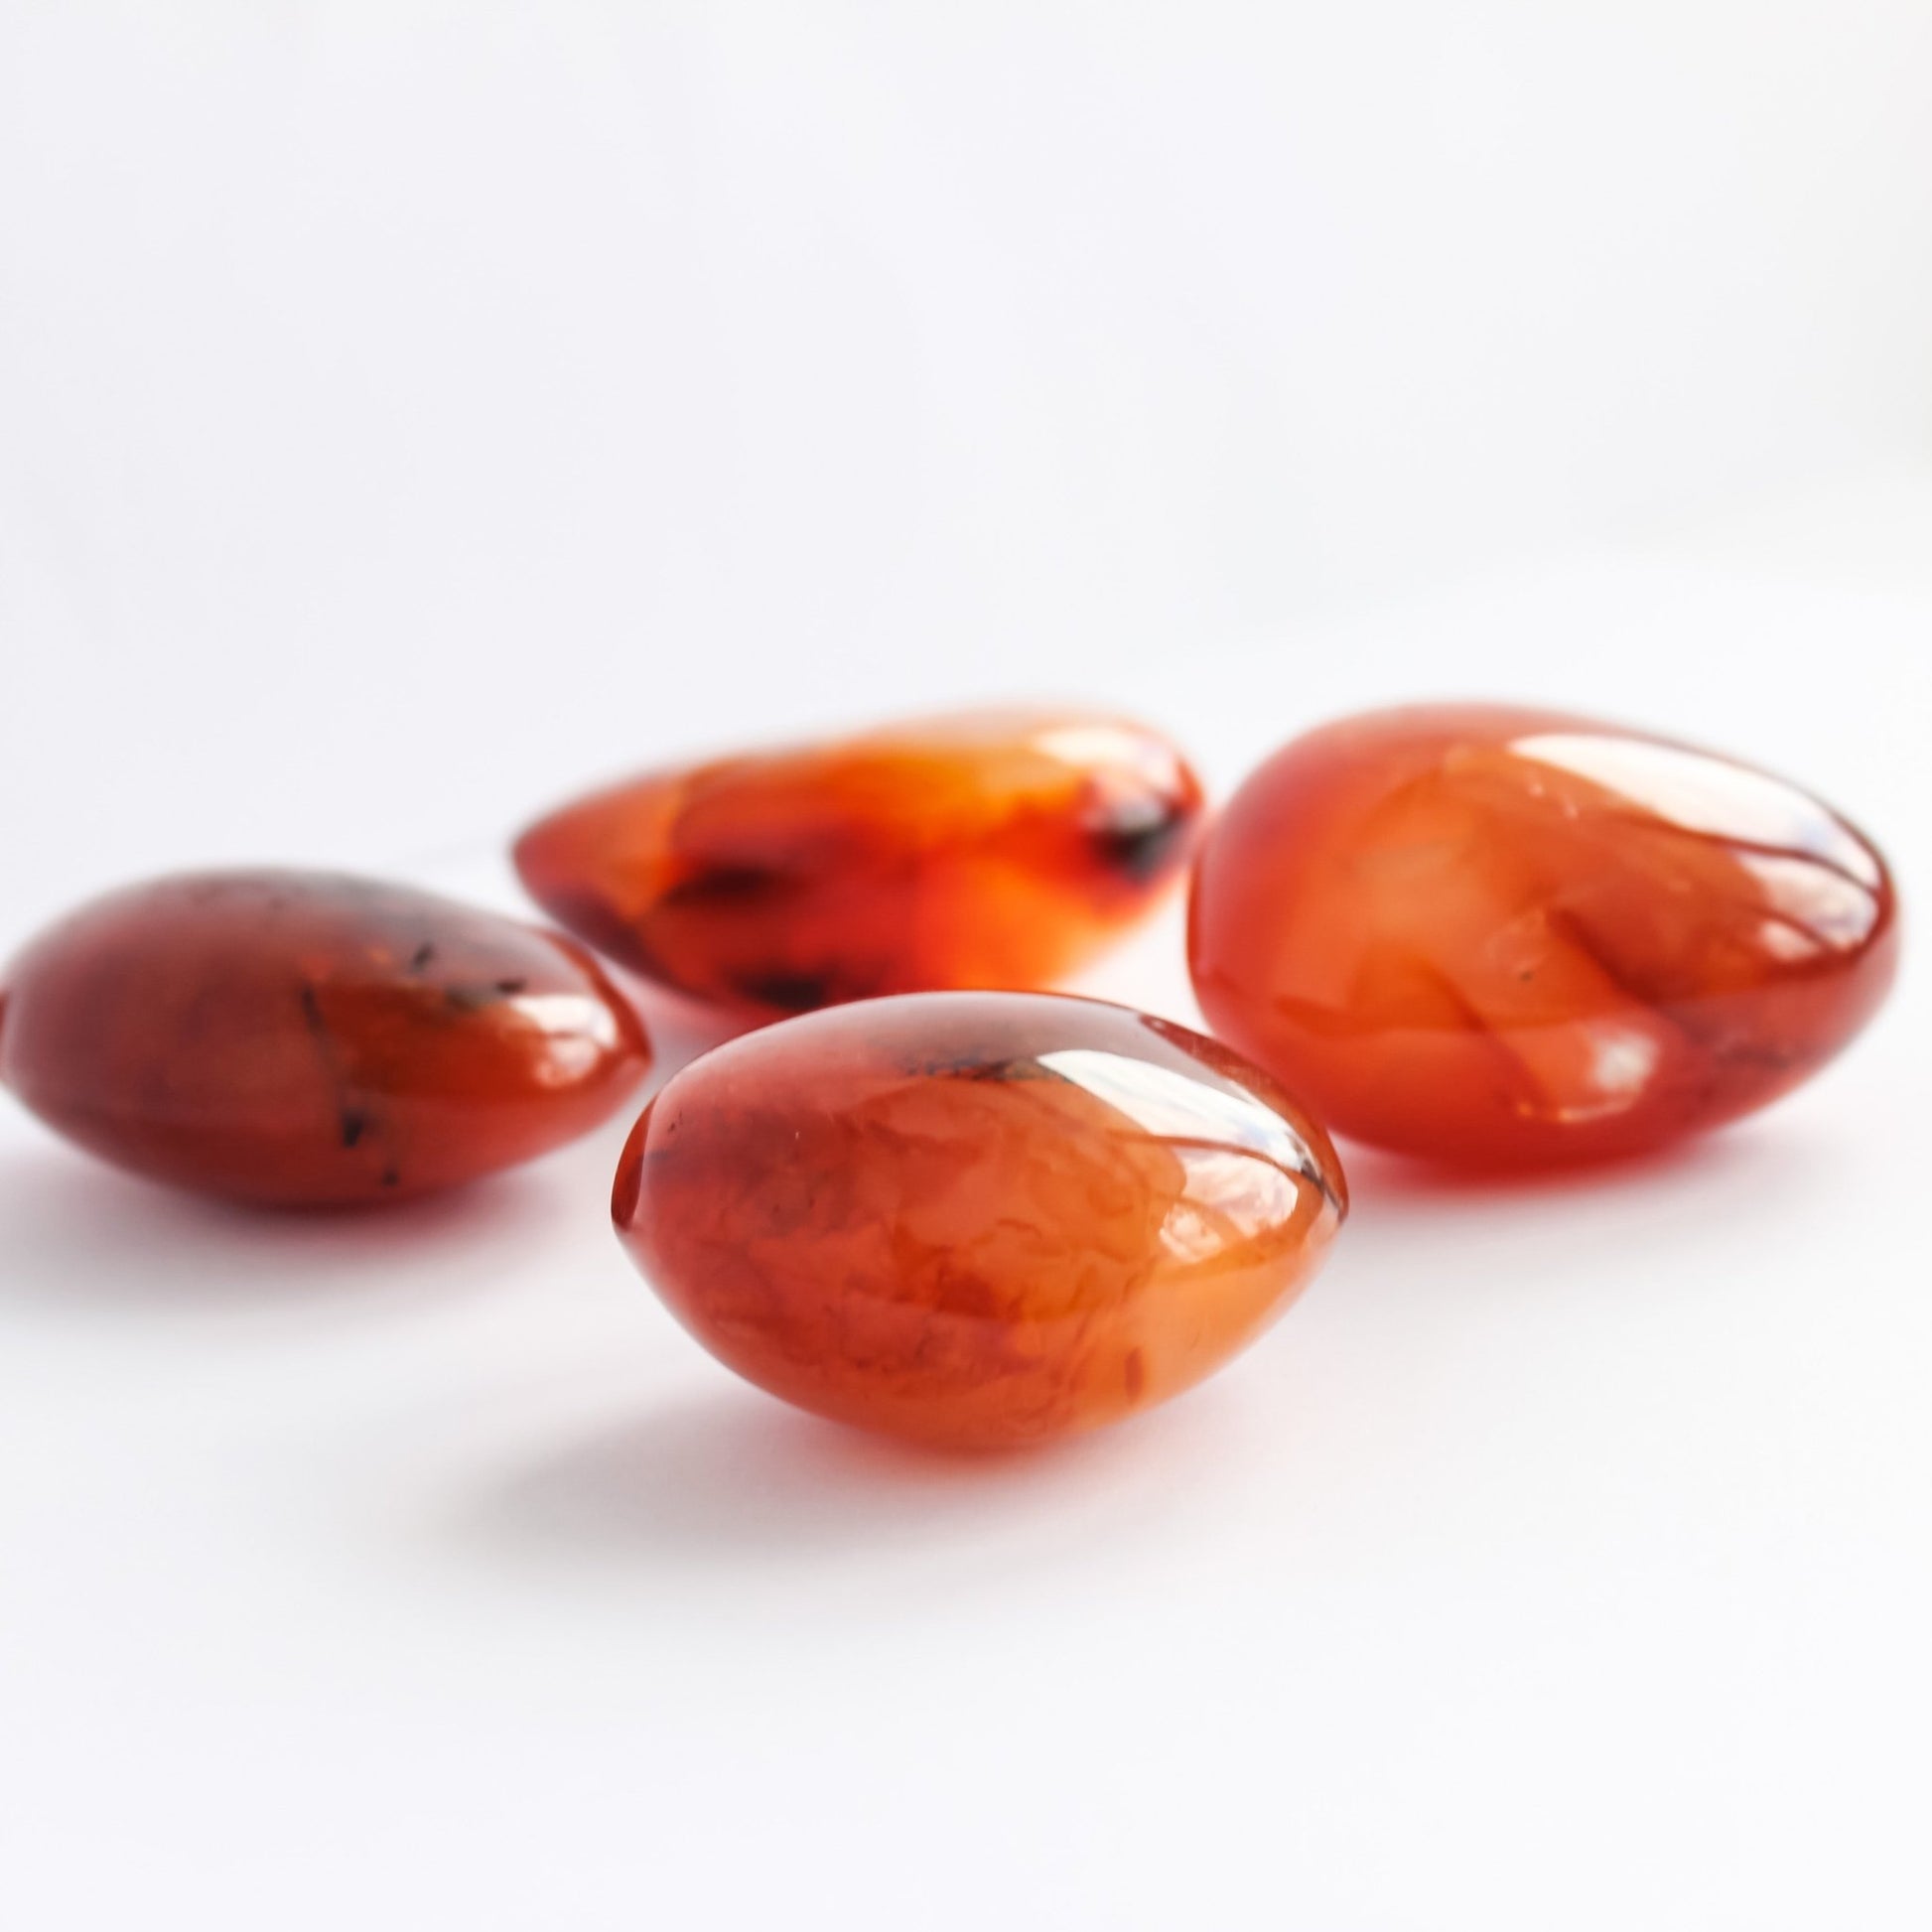 Carnelian Palm Stone - Conscious Crystals New Zealand Crystal and Spiritual Shop